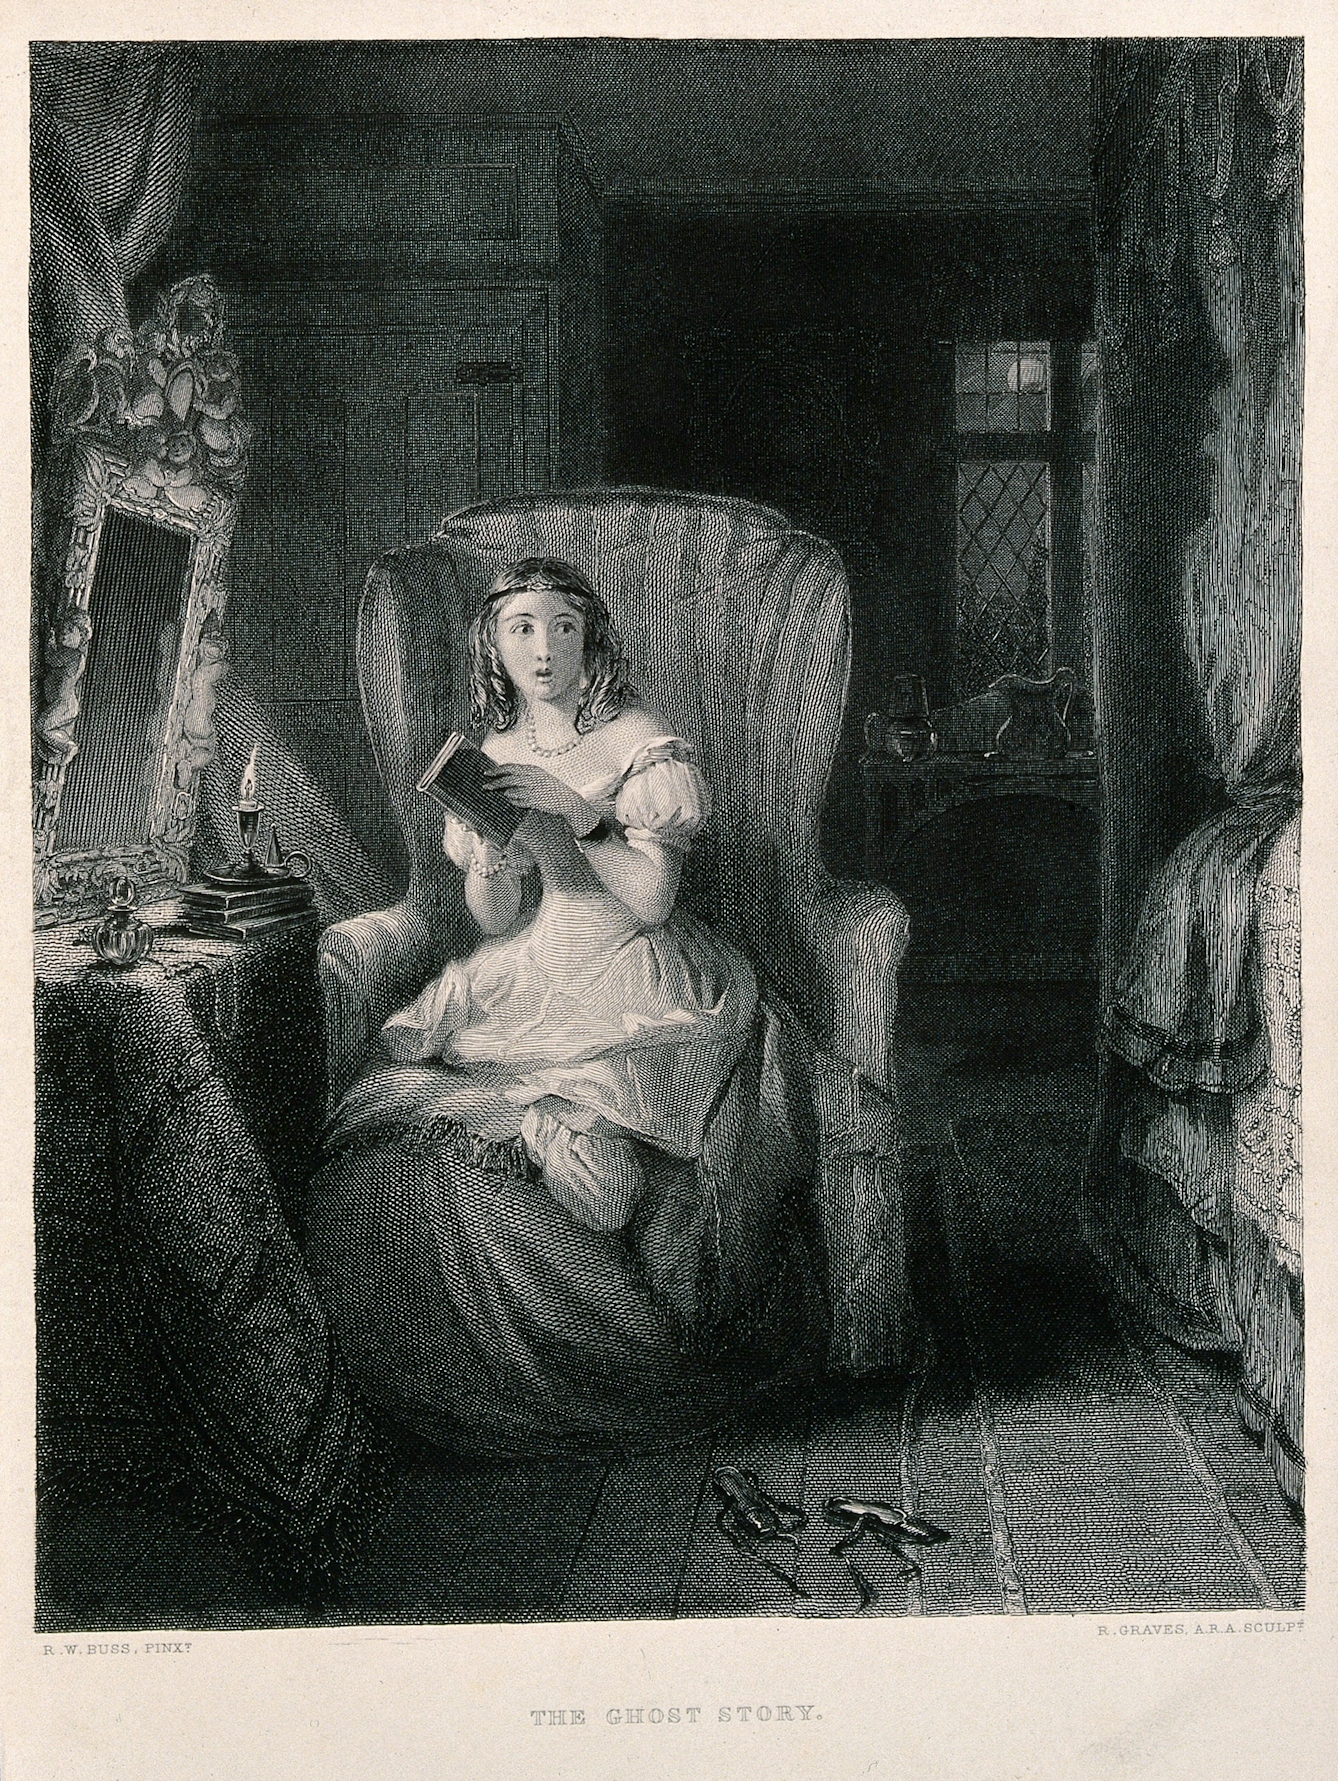 A young woman is sitting in a chair reading a story which has made her nervous